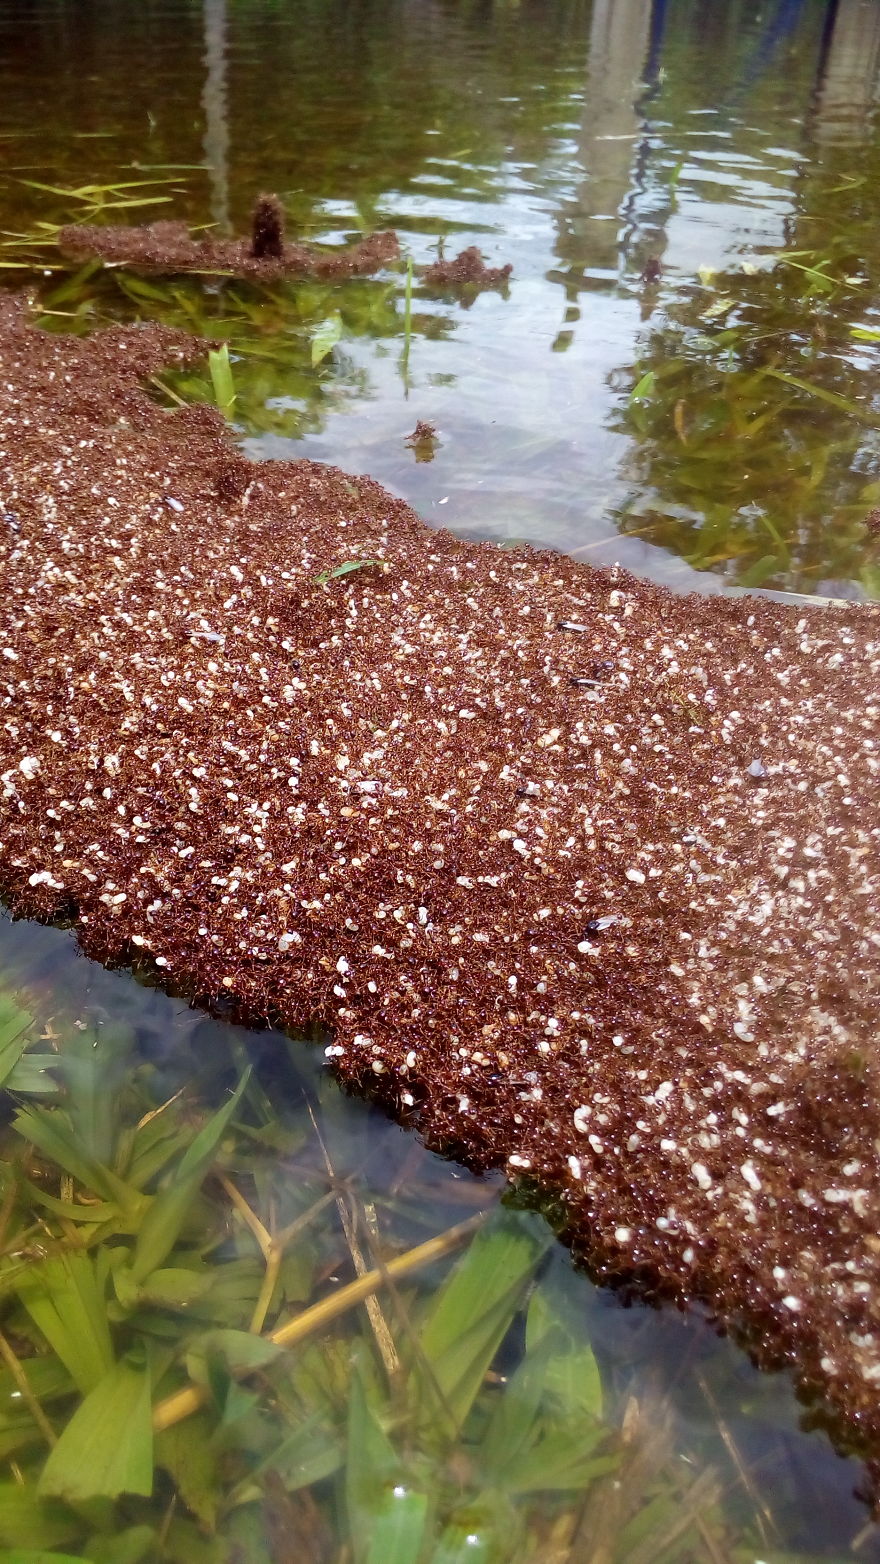 Ants Formed Hanged To Survive Floods